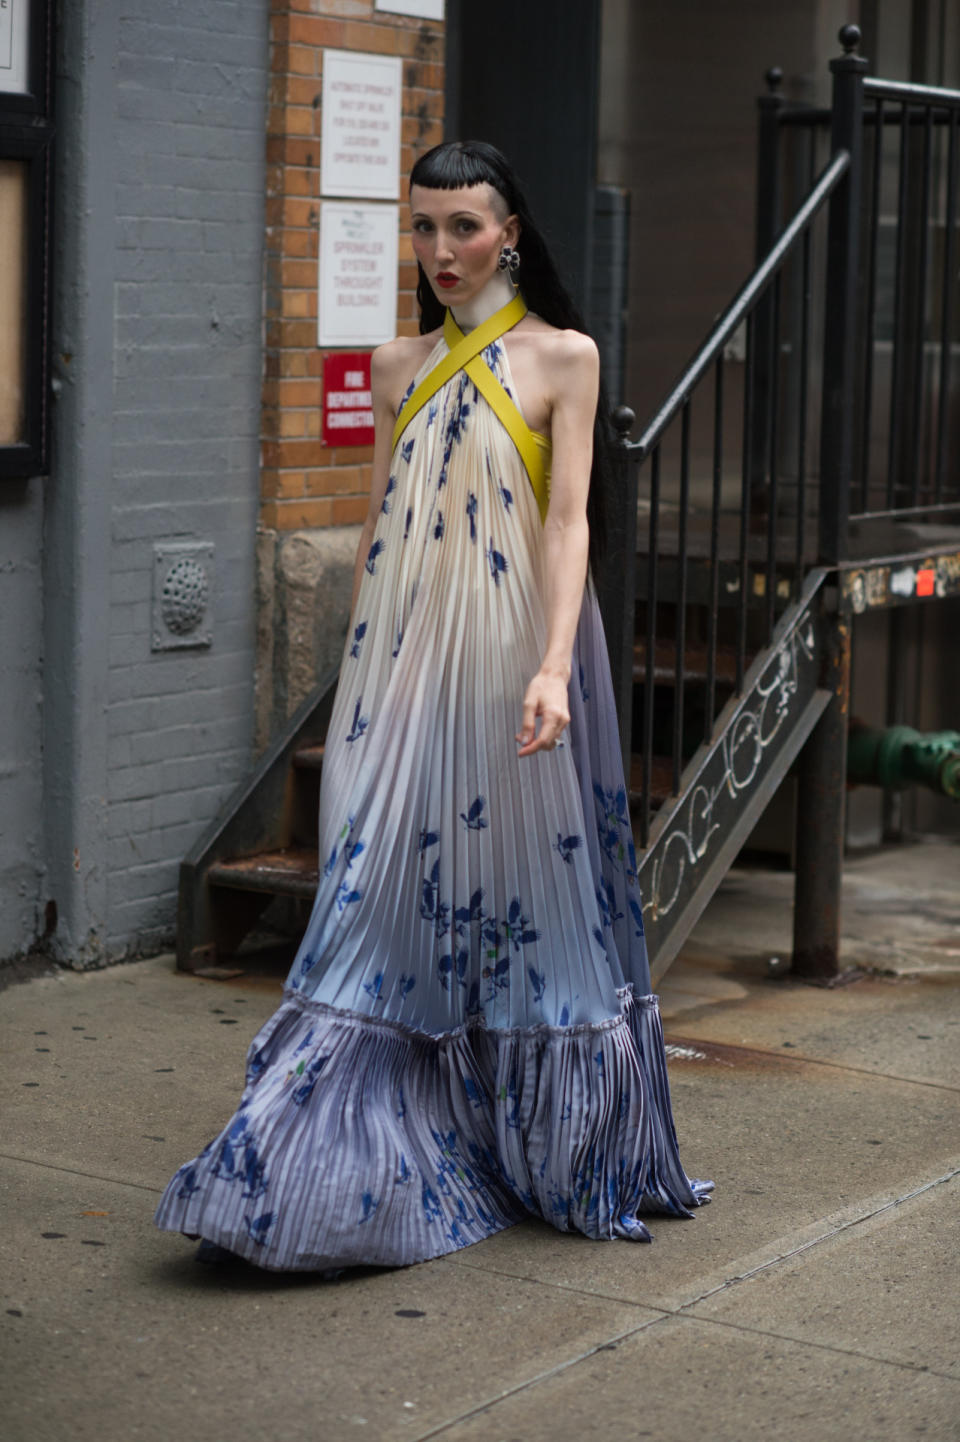 Michelle Harper in an ethereal look at New York Fashion Week.